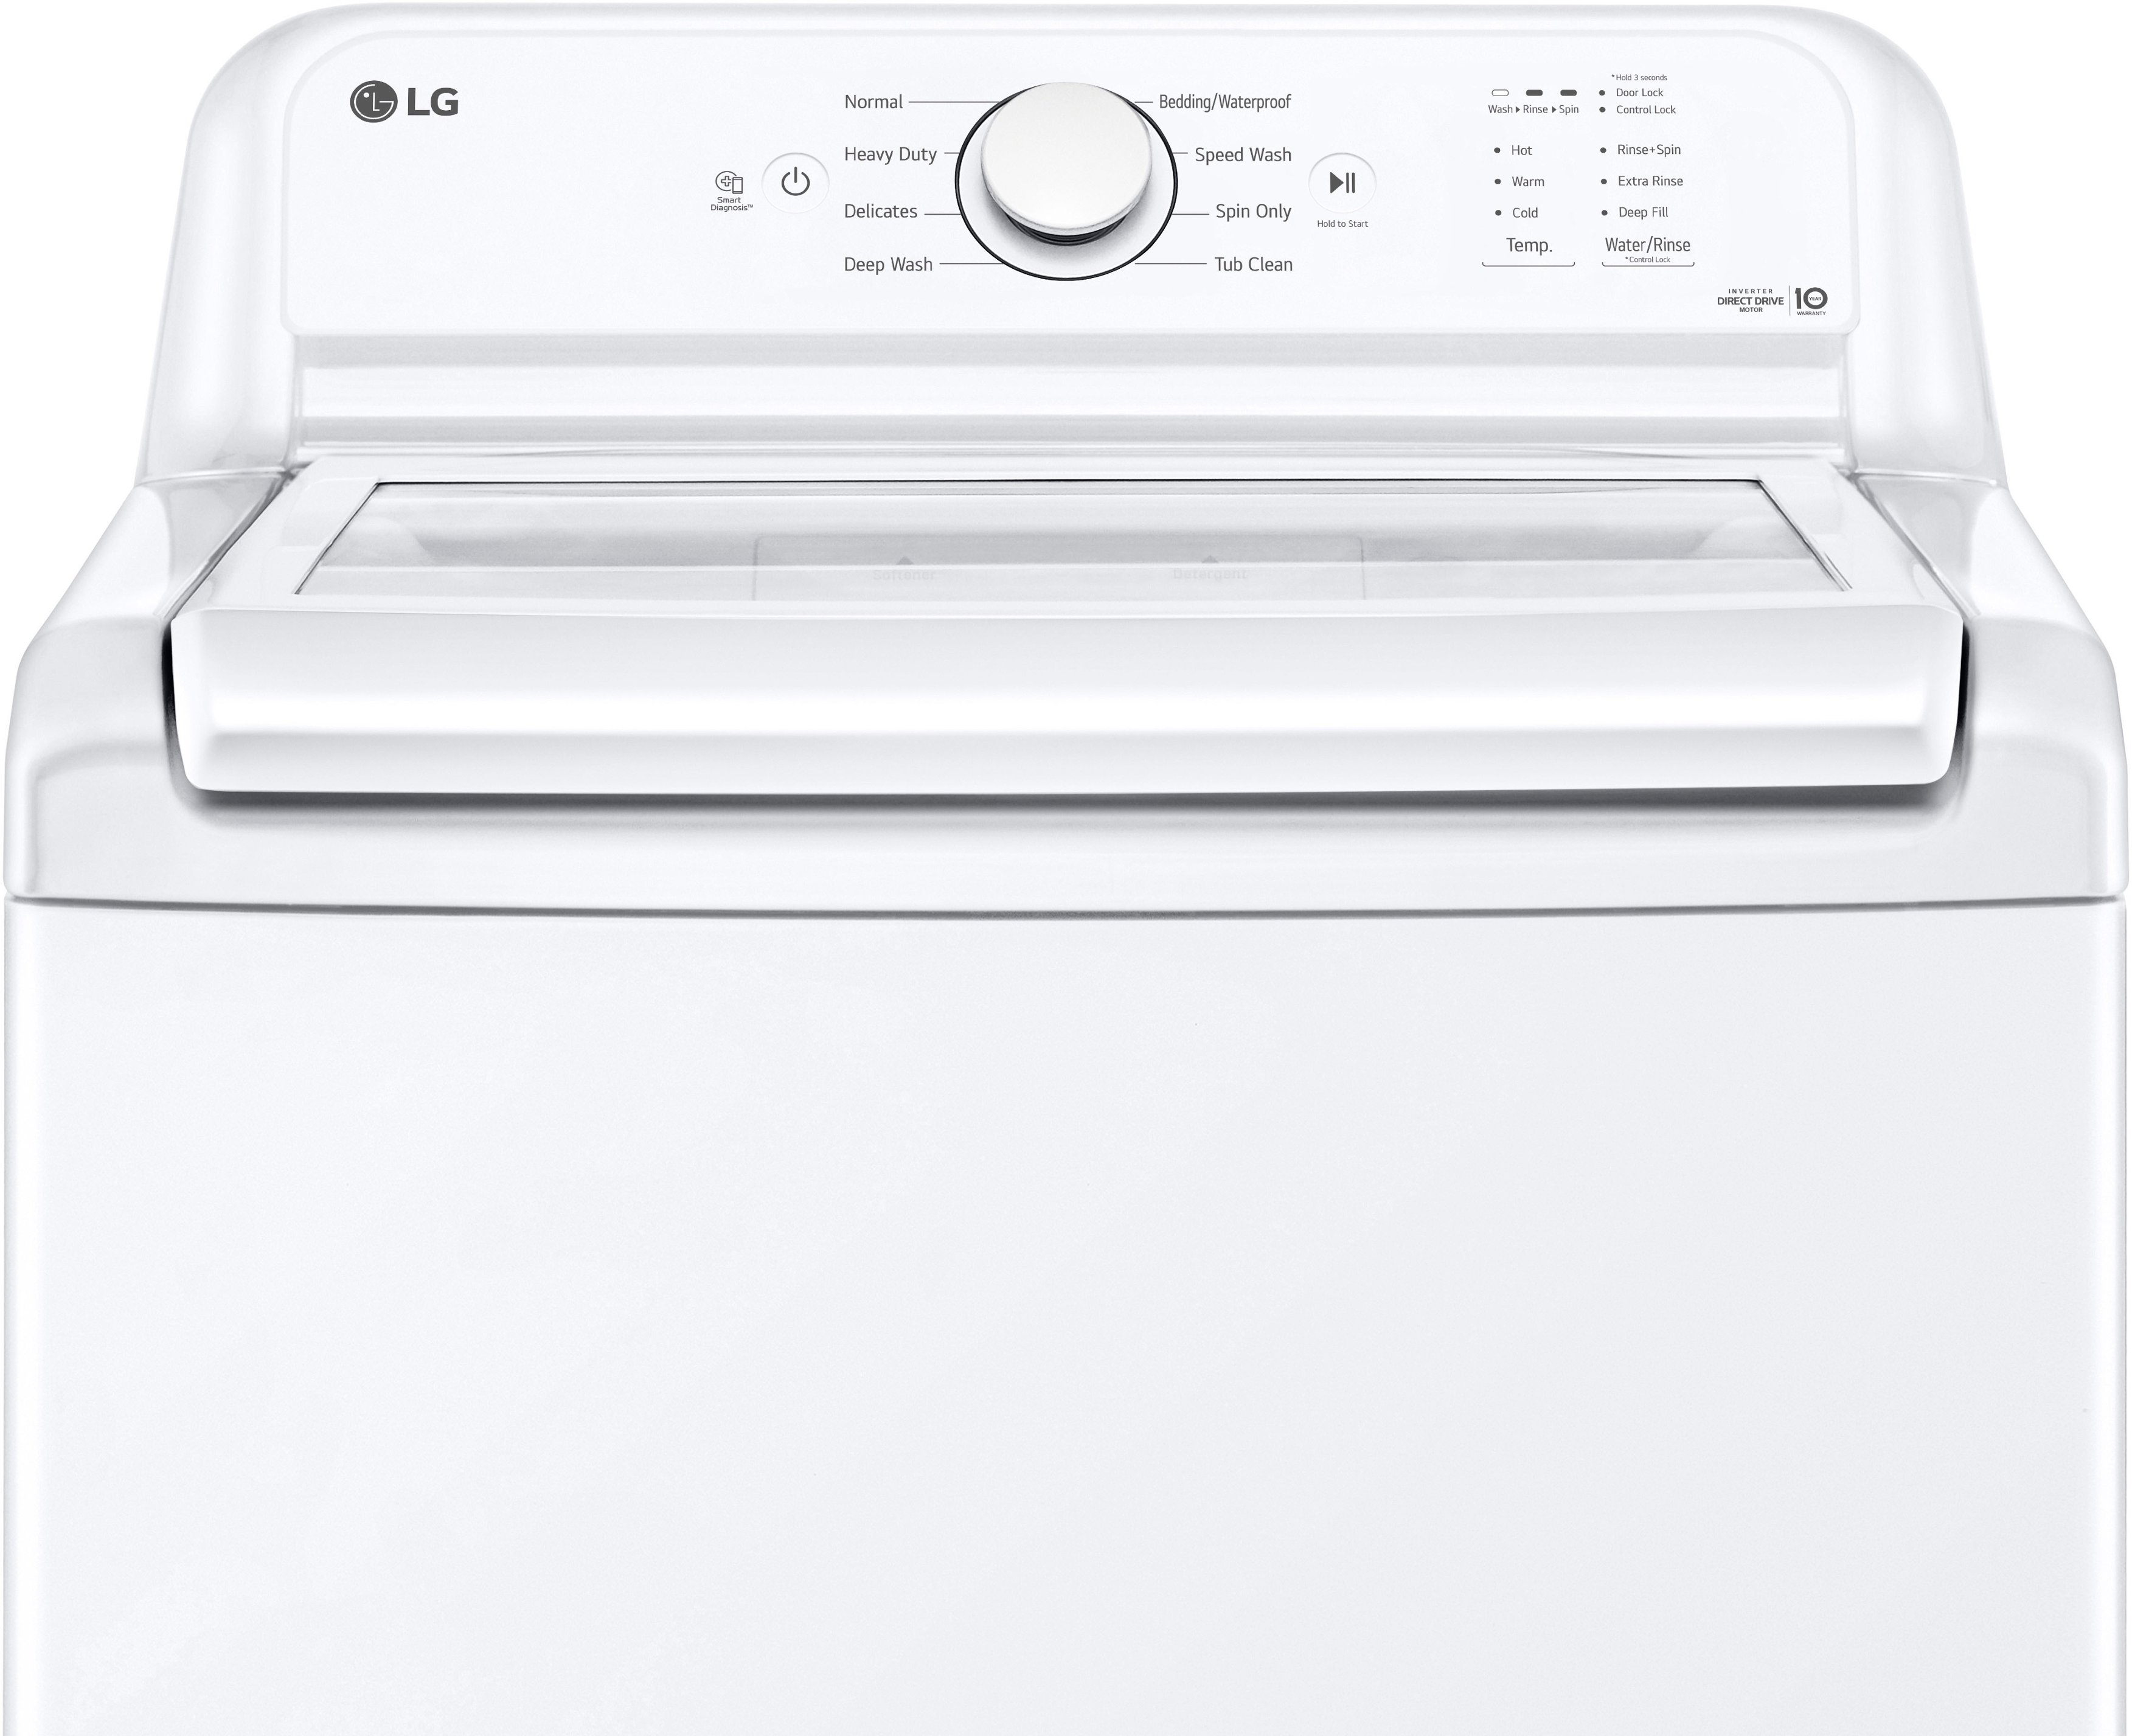 Load LG Washer Glass SlamProof with Ft. Buy 4.1 Top White Lid Best - Cu. WT6105CW